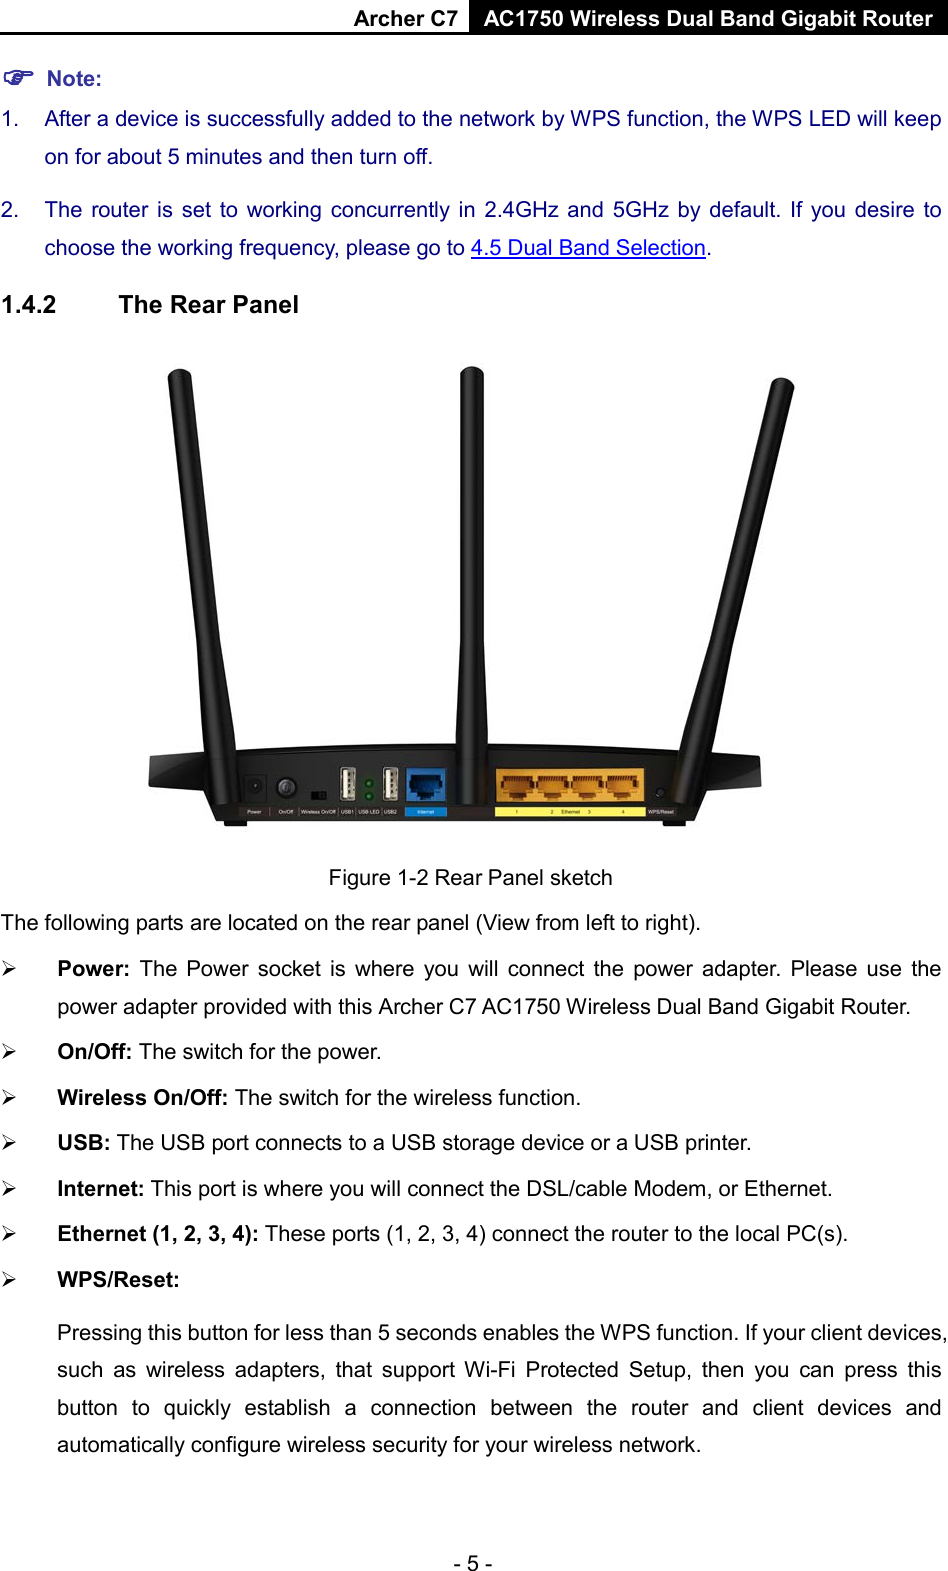 Archer C7 AC1750 Wireless Dual Band Gigabit Router   Note: 1. After a device is successfully added to the network by WPS function, the WPS LED will keep on for about 5 minutes and then turn off.   2. The router is set to working concurrently in 2.4GHz and 5GHz by default. If you desire to choose the working frequency, please go to 4.5 Dual Band Selection. 1.4.2 The Rear Panel  Figure 1-2 Rear Panel sketch The following parts are located on the rear panel (View from left to right).  Power:  The Power socket is where you will connect the power adapter.  Please use the power adapter provided with this Archer C7 AC1750 Wireless Dual Band Gigabit Router.  On/Off: The switch for the power.  Wireless On/Off: The switch for the wireless function.  USB: The USB port connects to a USB storage device or a USB printer.  Internet: This port is where you will connect the DSL/cable Modem, or Ethernet.  Ethernet (1, 2, 3, 4): These ports (1, 2, 3, 4) connect the router to the local PC(s).  WPS/Reset:   Pressing this button for less than 5 seconds enables the WPS function. If your client devices, such as wireless adapters, that support Wi-Fi  Protected Setup, then you can press this button to quickly  establish a connection between the router and client devices and automatically configure wireless security for your wireless network.   - 5 - 